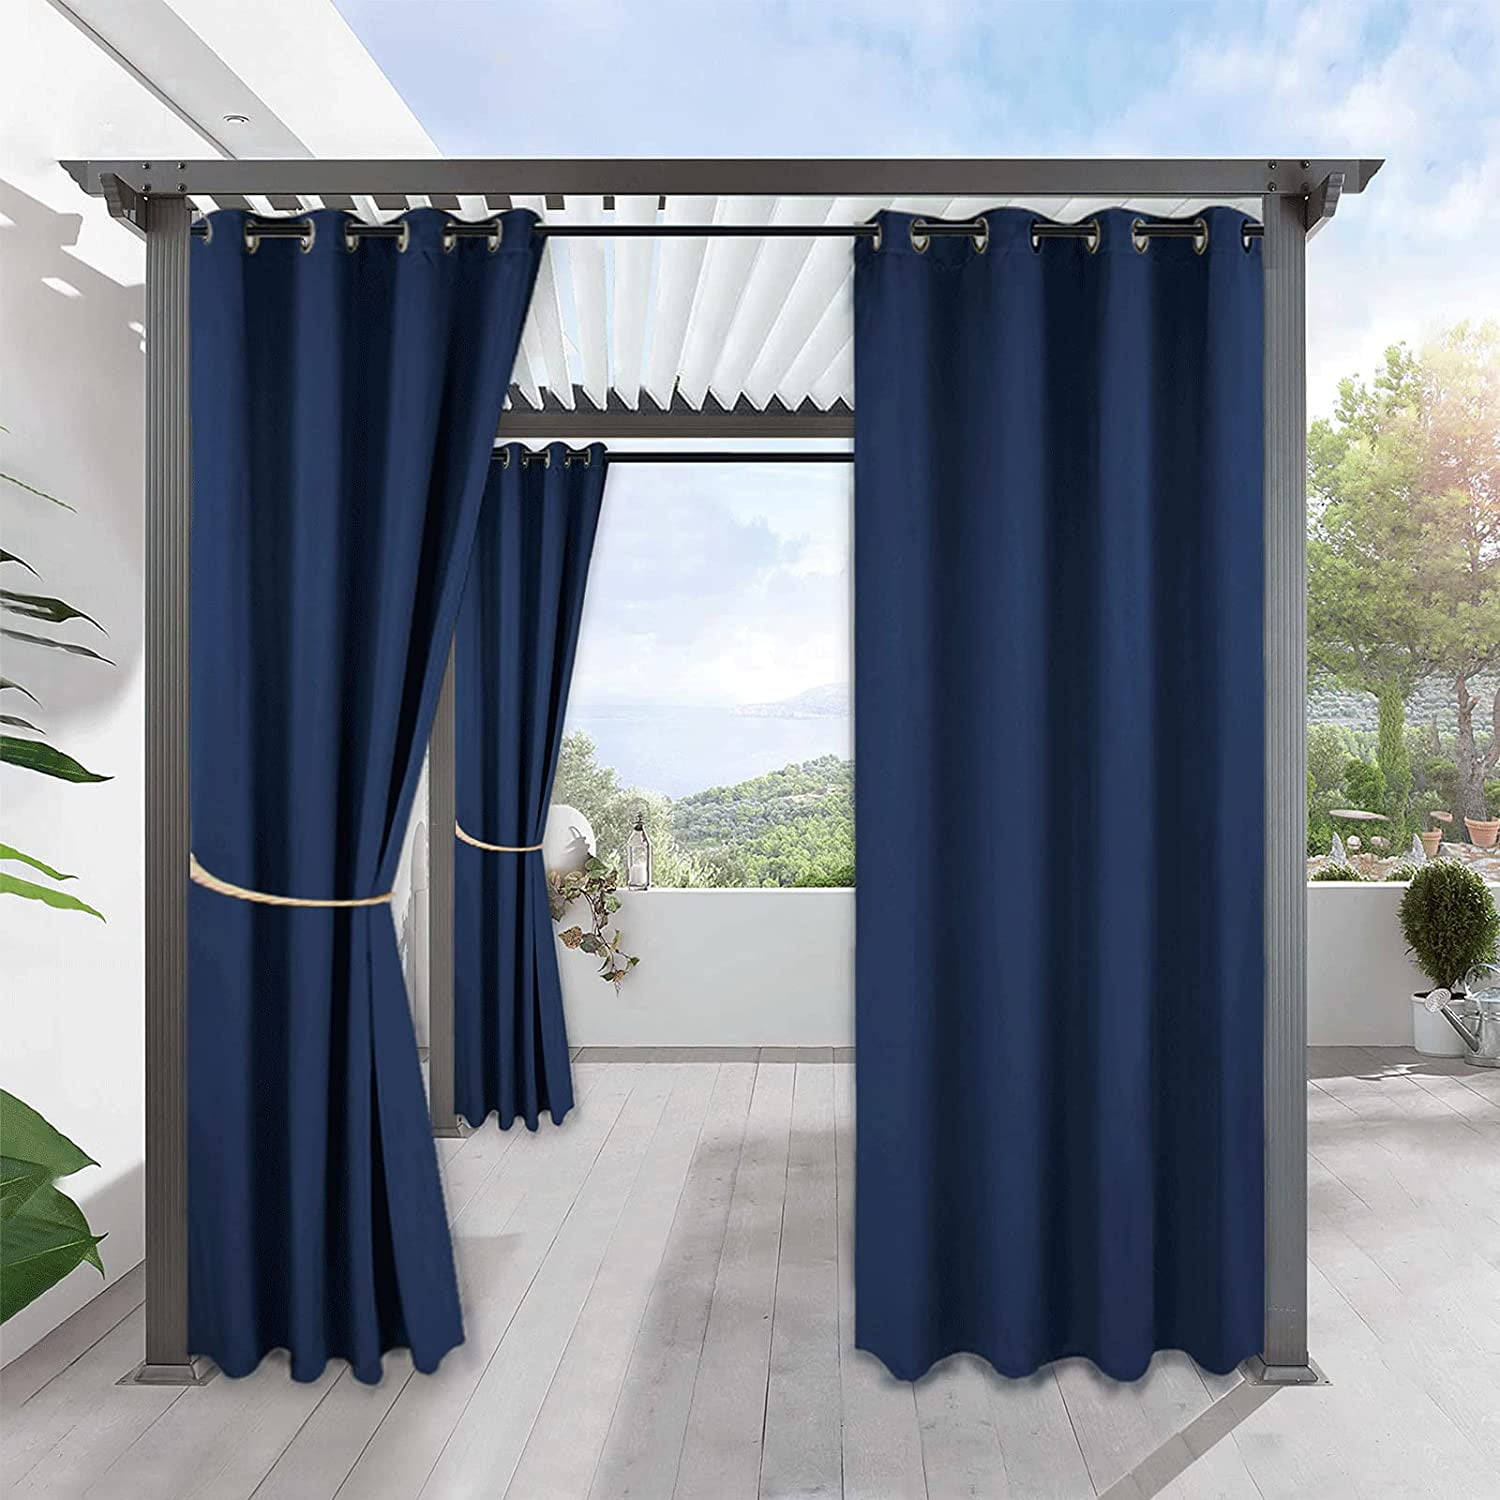 1 Panel Pro space 58 x 120 inch Outdoor Curtain Colored Lines Print Curtain Gazebo Patio Curtain Drape Grommet Top Blackout Porch Blackout Protected Waterproof Curtain/Drape 